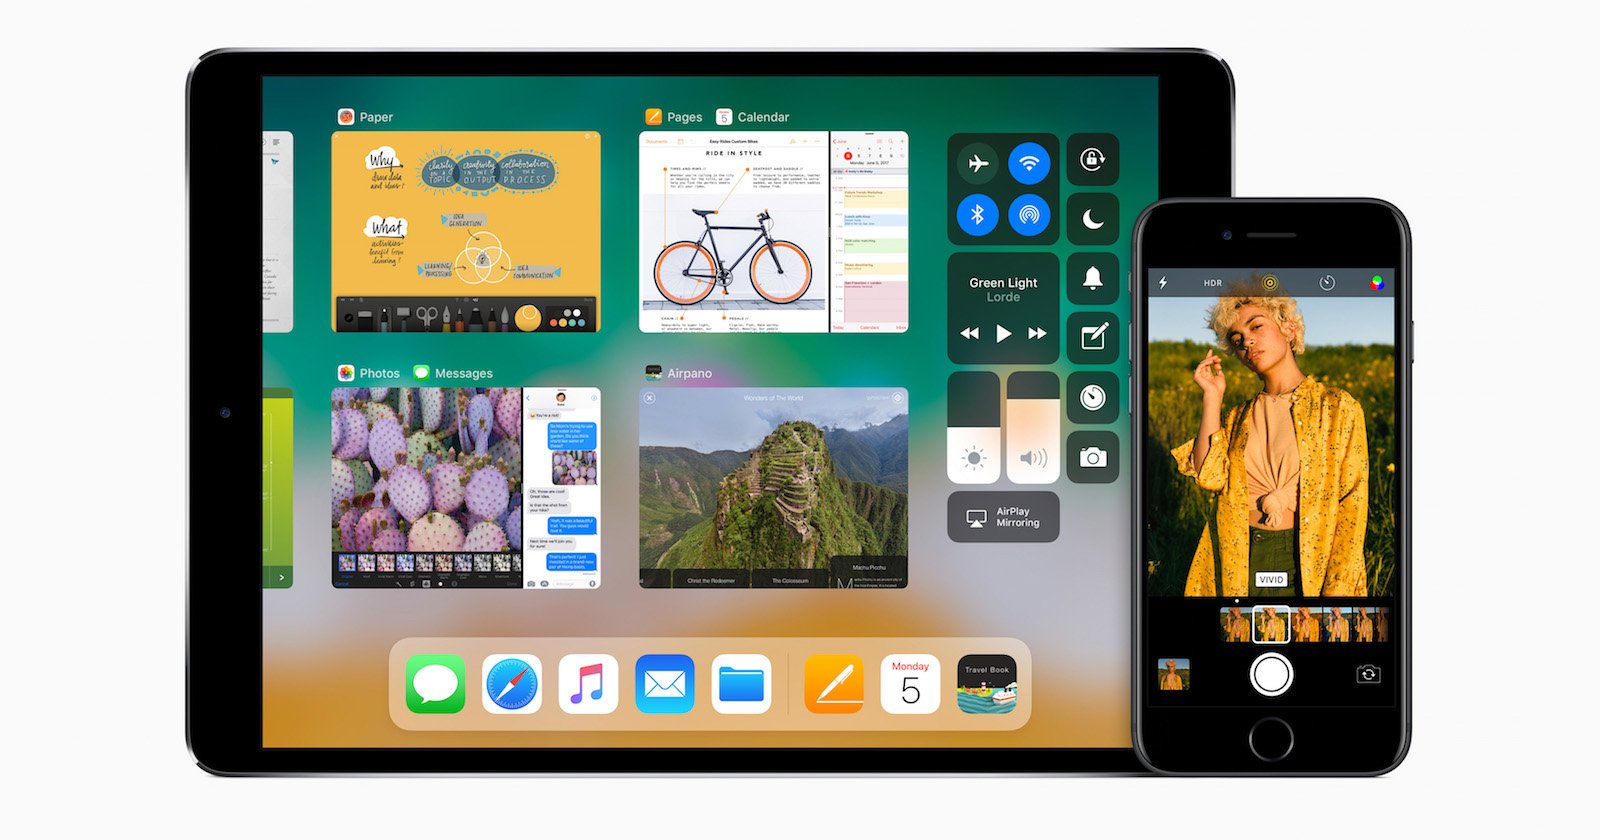 Apple Will Add Creative New Features to Photos and Camera Apps in iOS 11